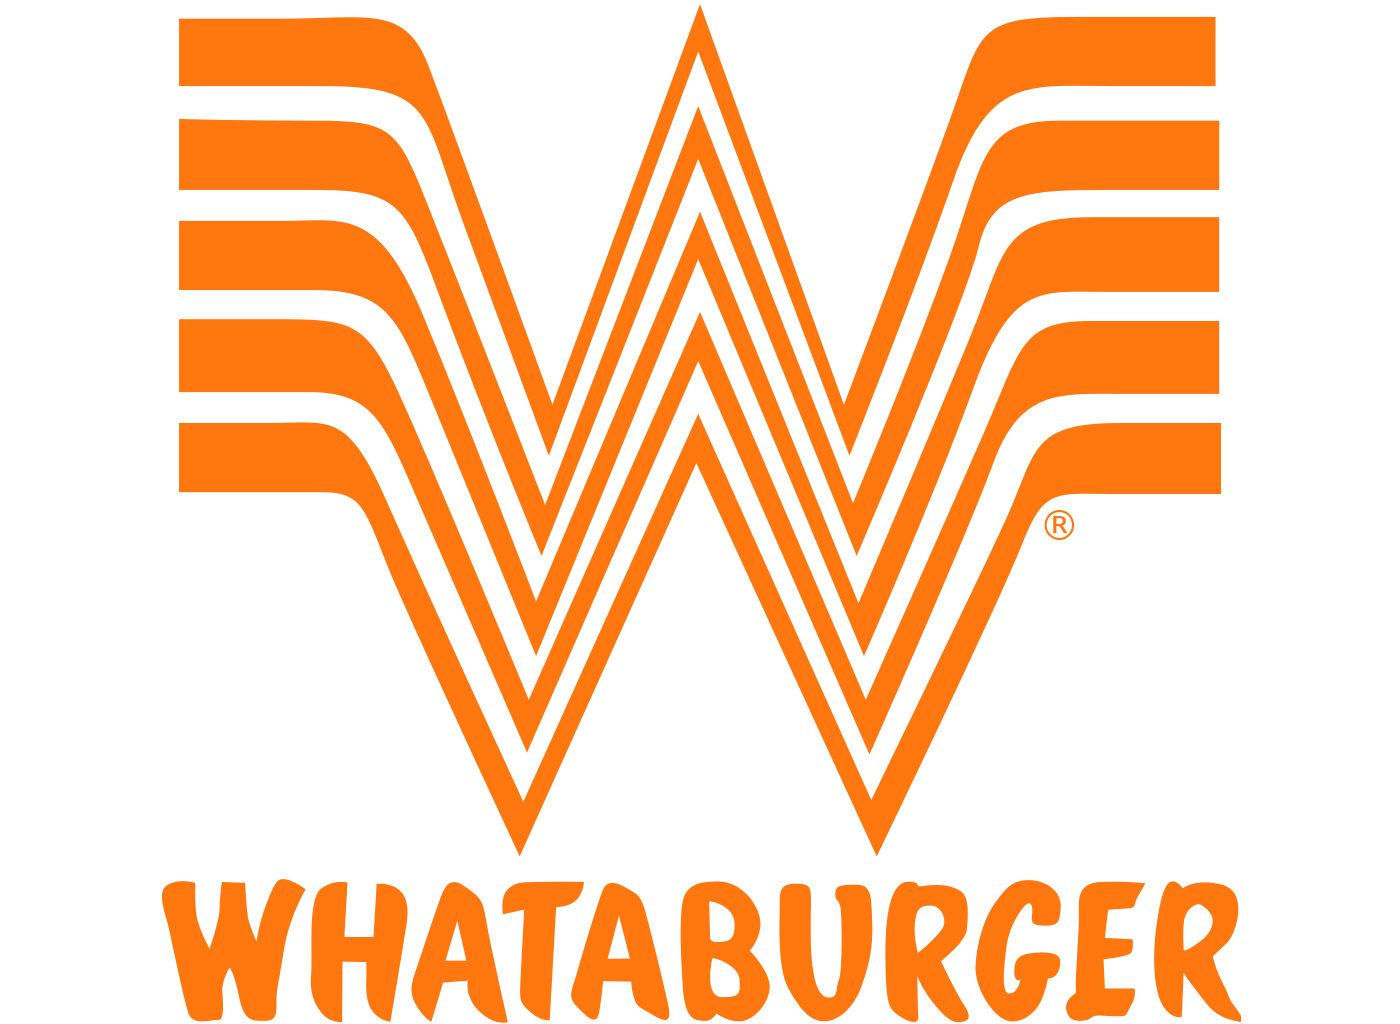 Now you can show everyone just how much you love your Whataburger.